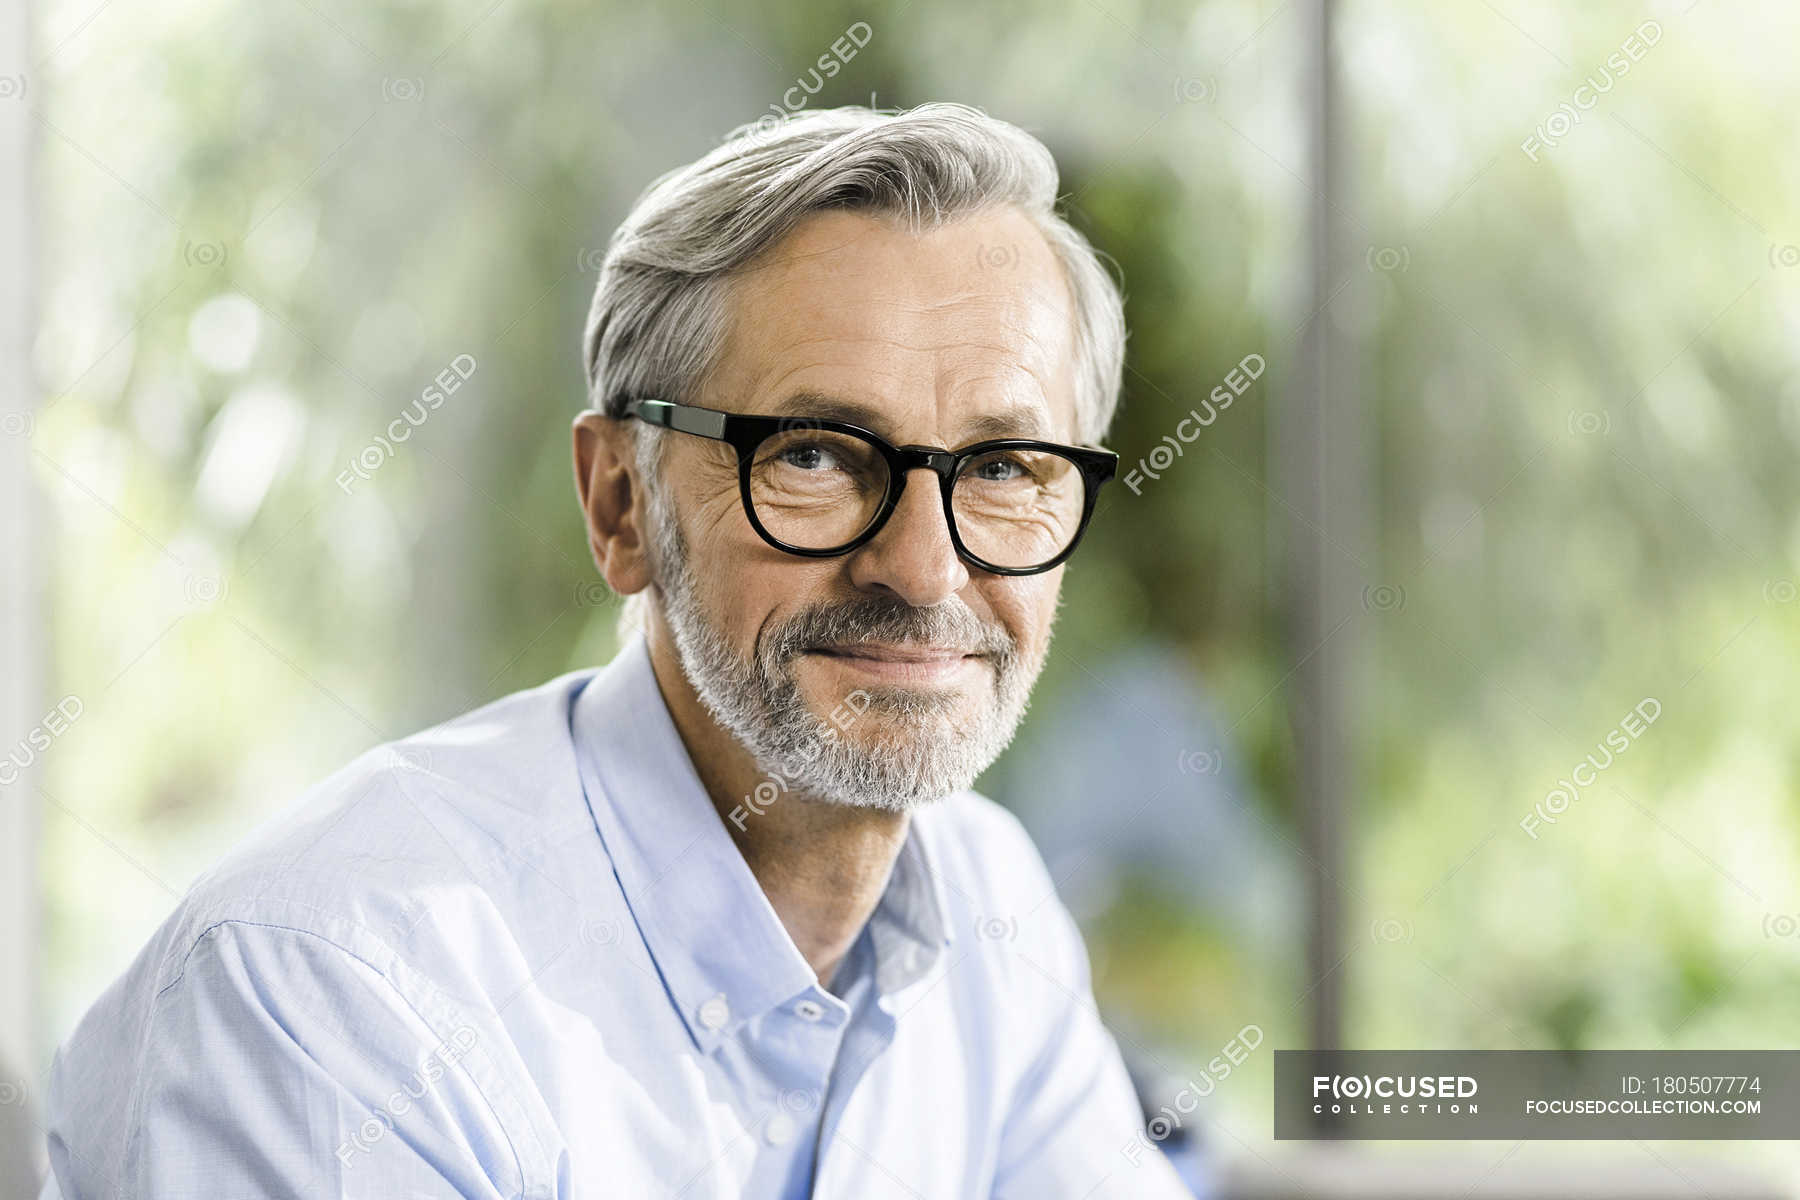 Portrait of smiling man with grey hair and beard wearing spectacles —  leisure, Caucasian Appearance - Stock Photo | #180507774